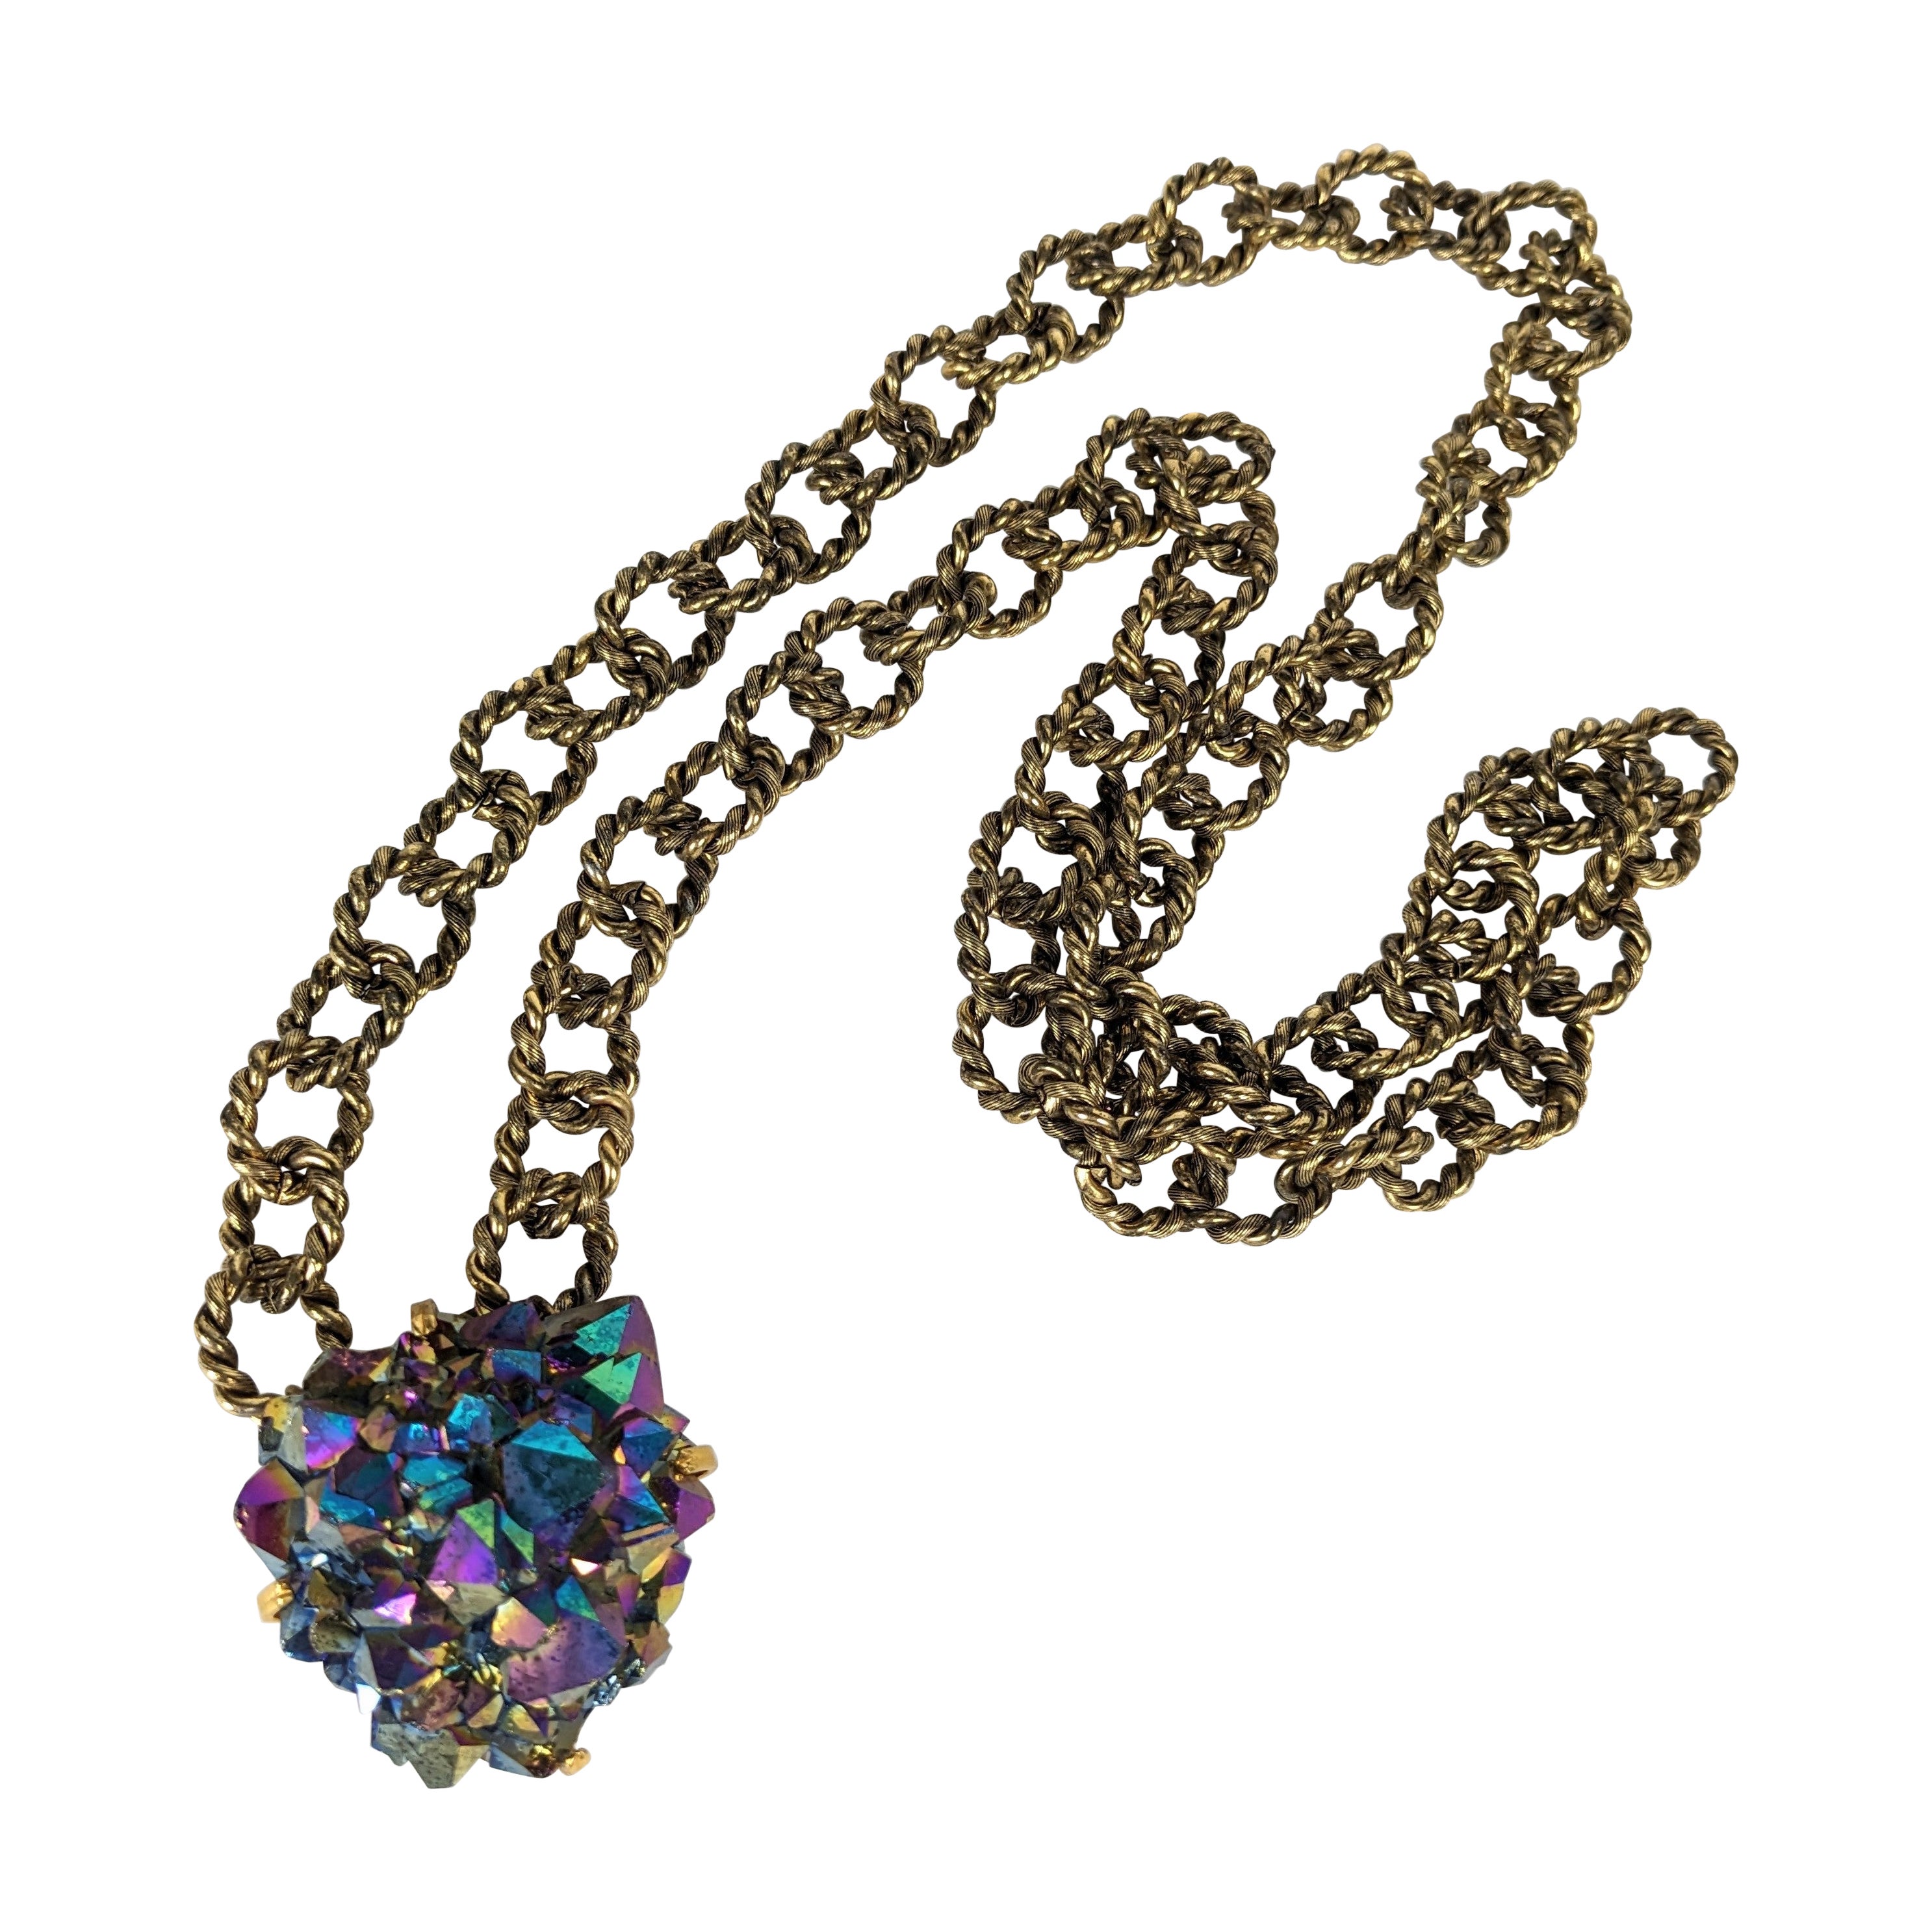 Mark Walsh Leslie Chin Chain Necklaces